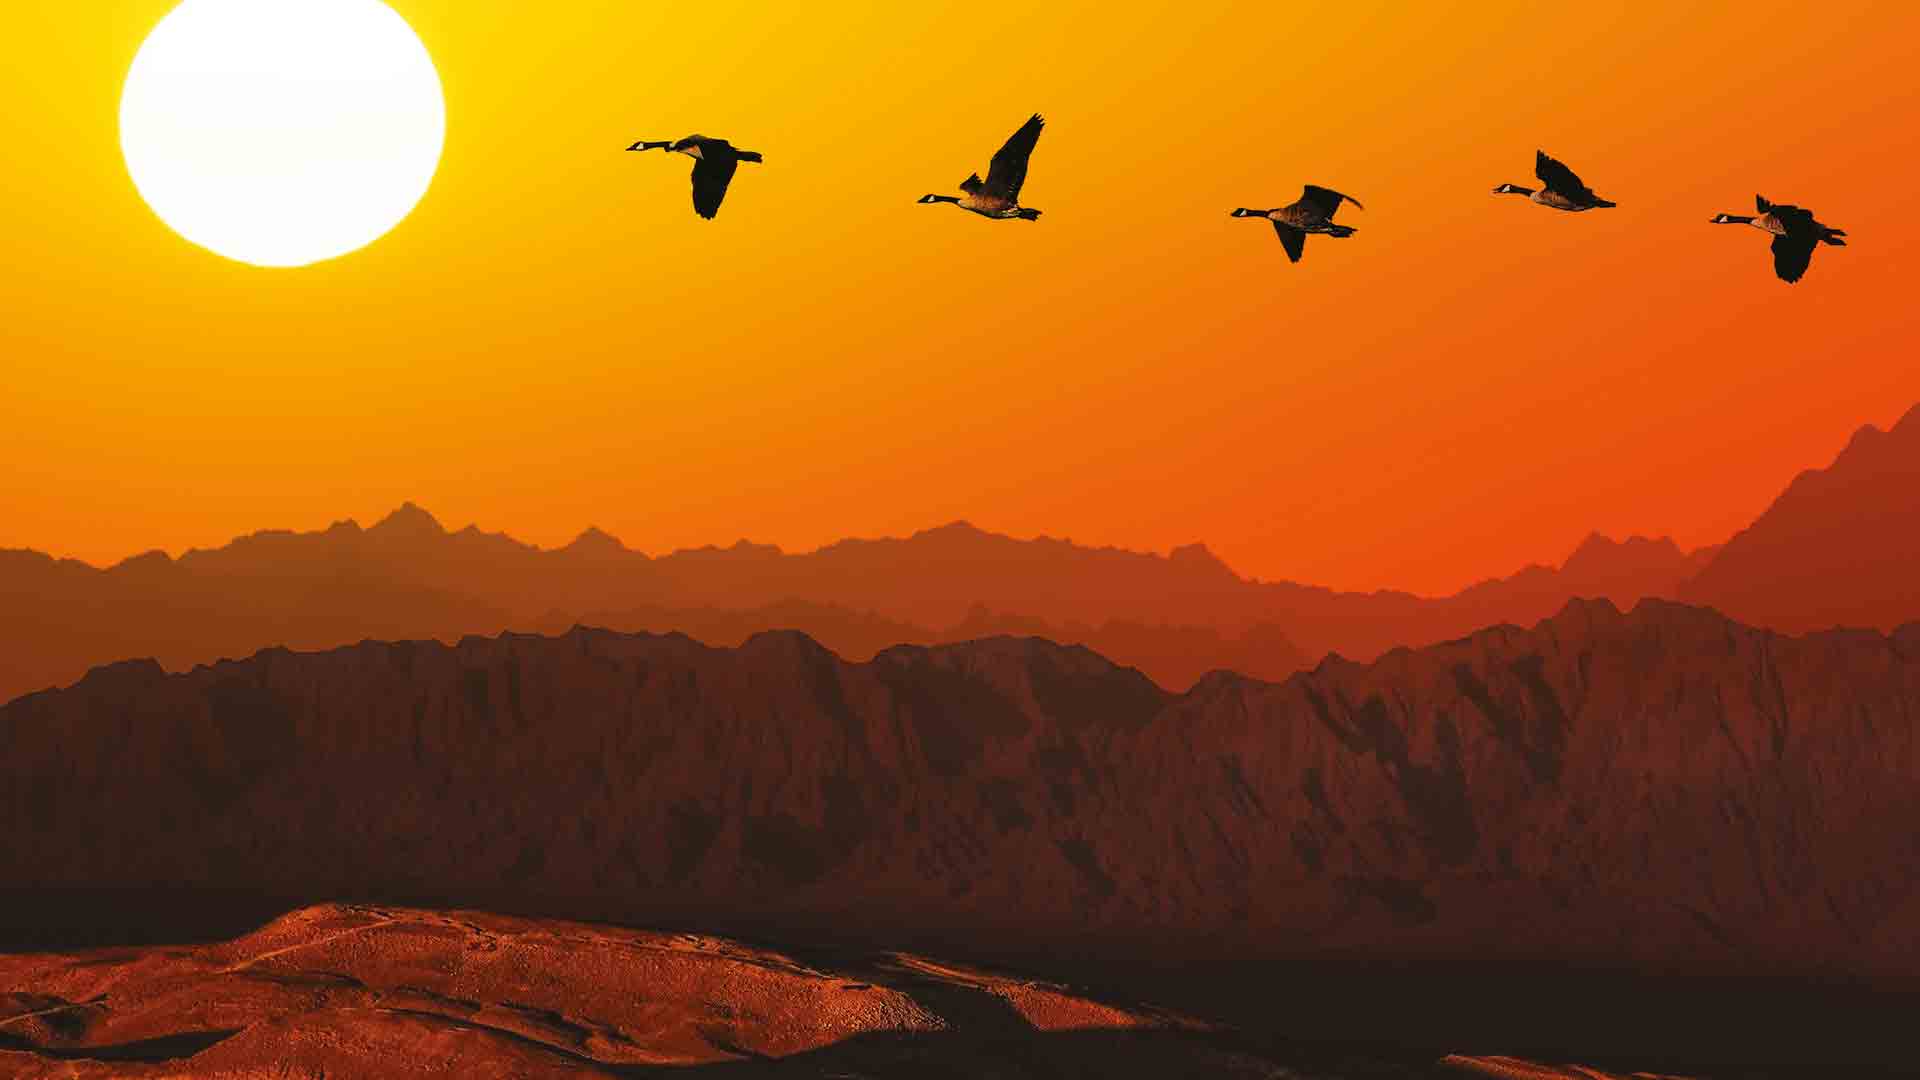 Birds migrating in the sunset